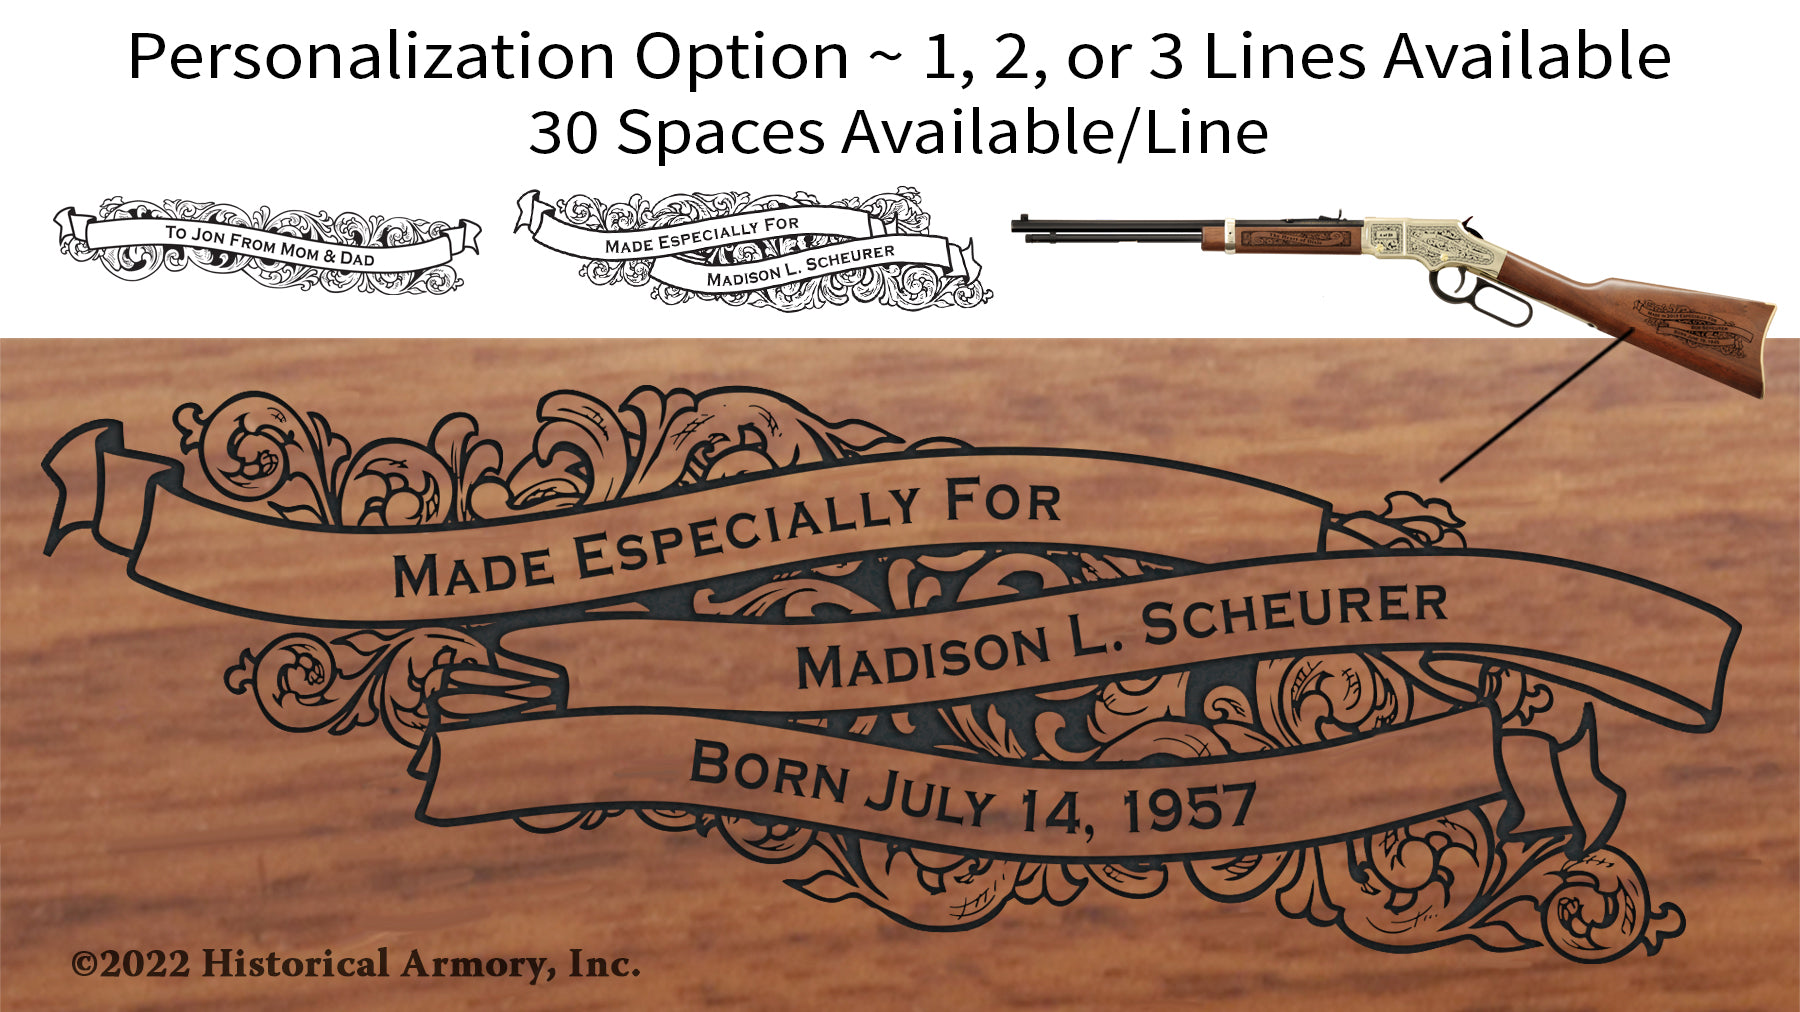 Tuscarawas County Ohio Engraved Rifle Personalization